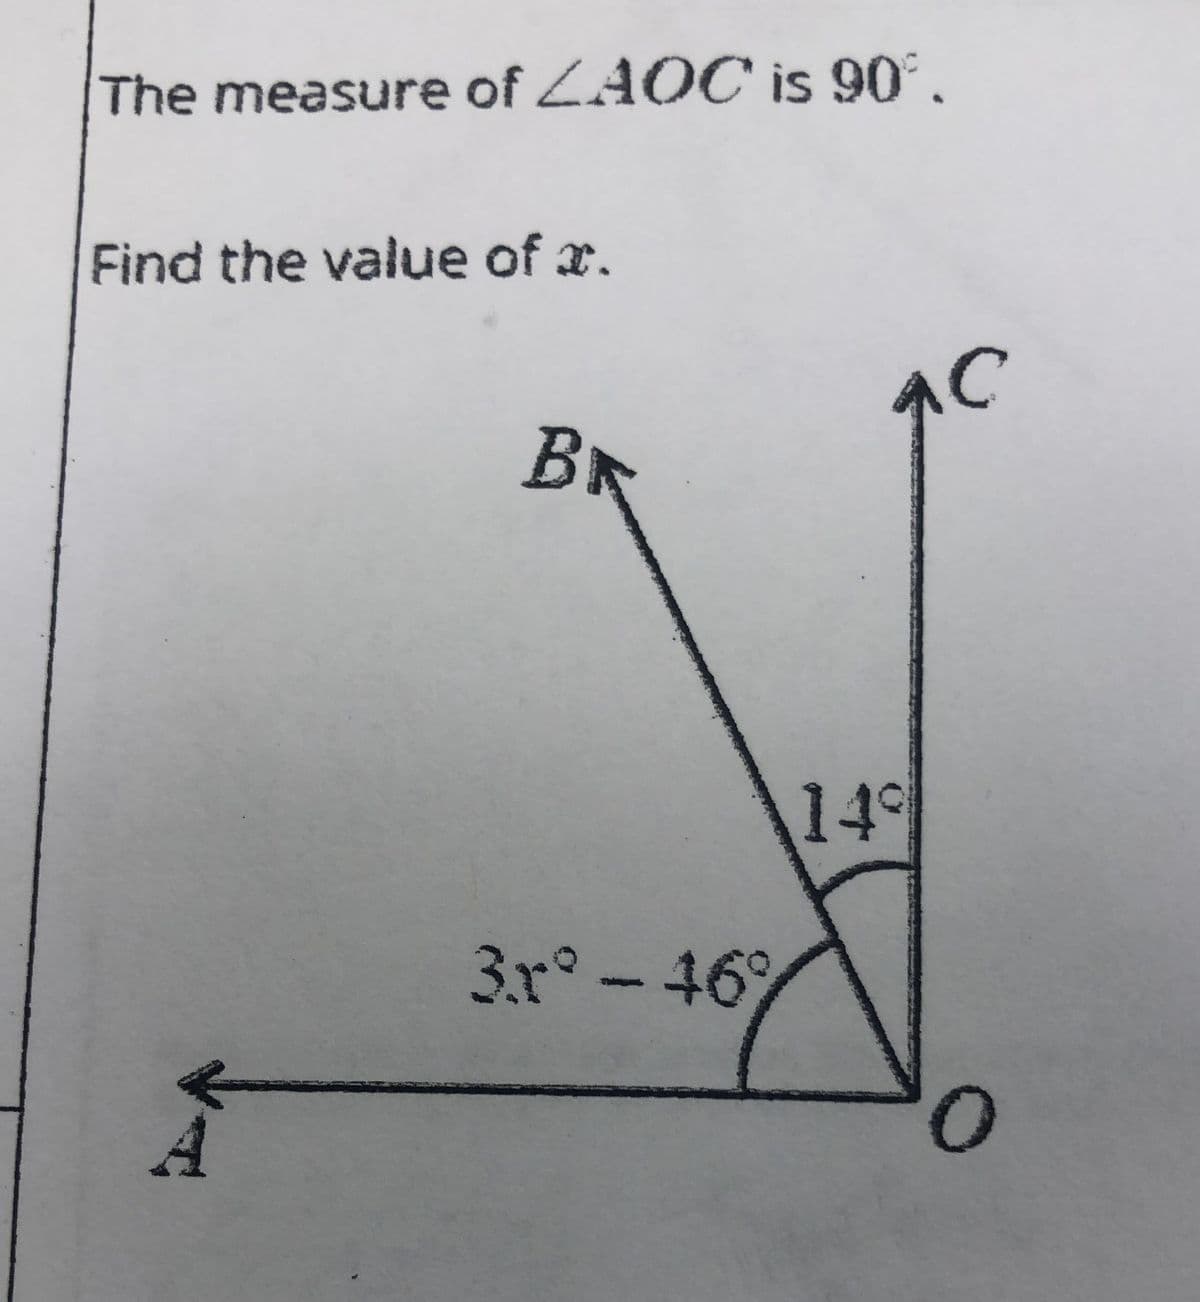 The measure of ZAOC is 90°,
Find the value of x.
BR
149
3x°-469
